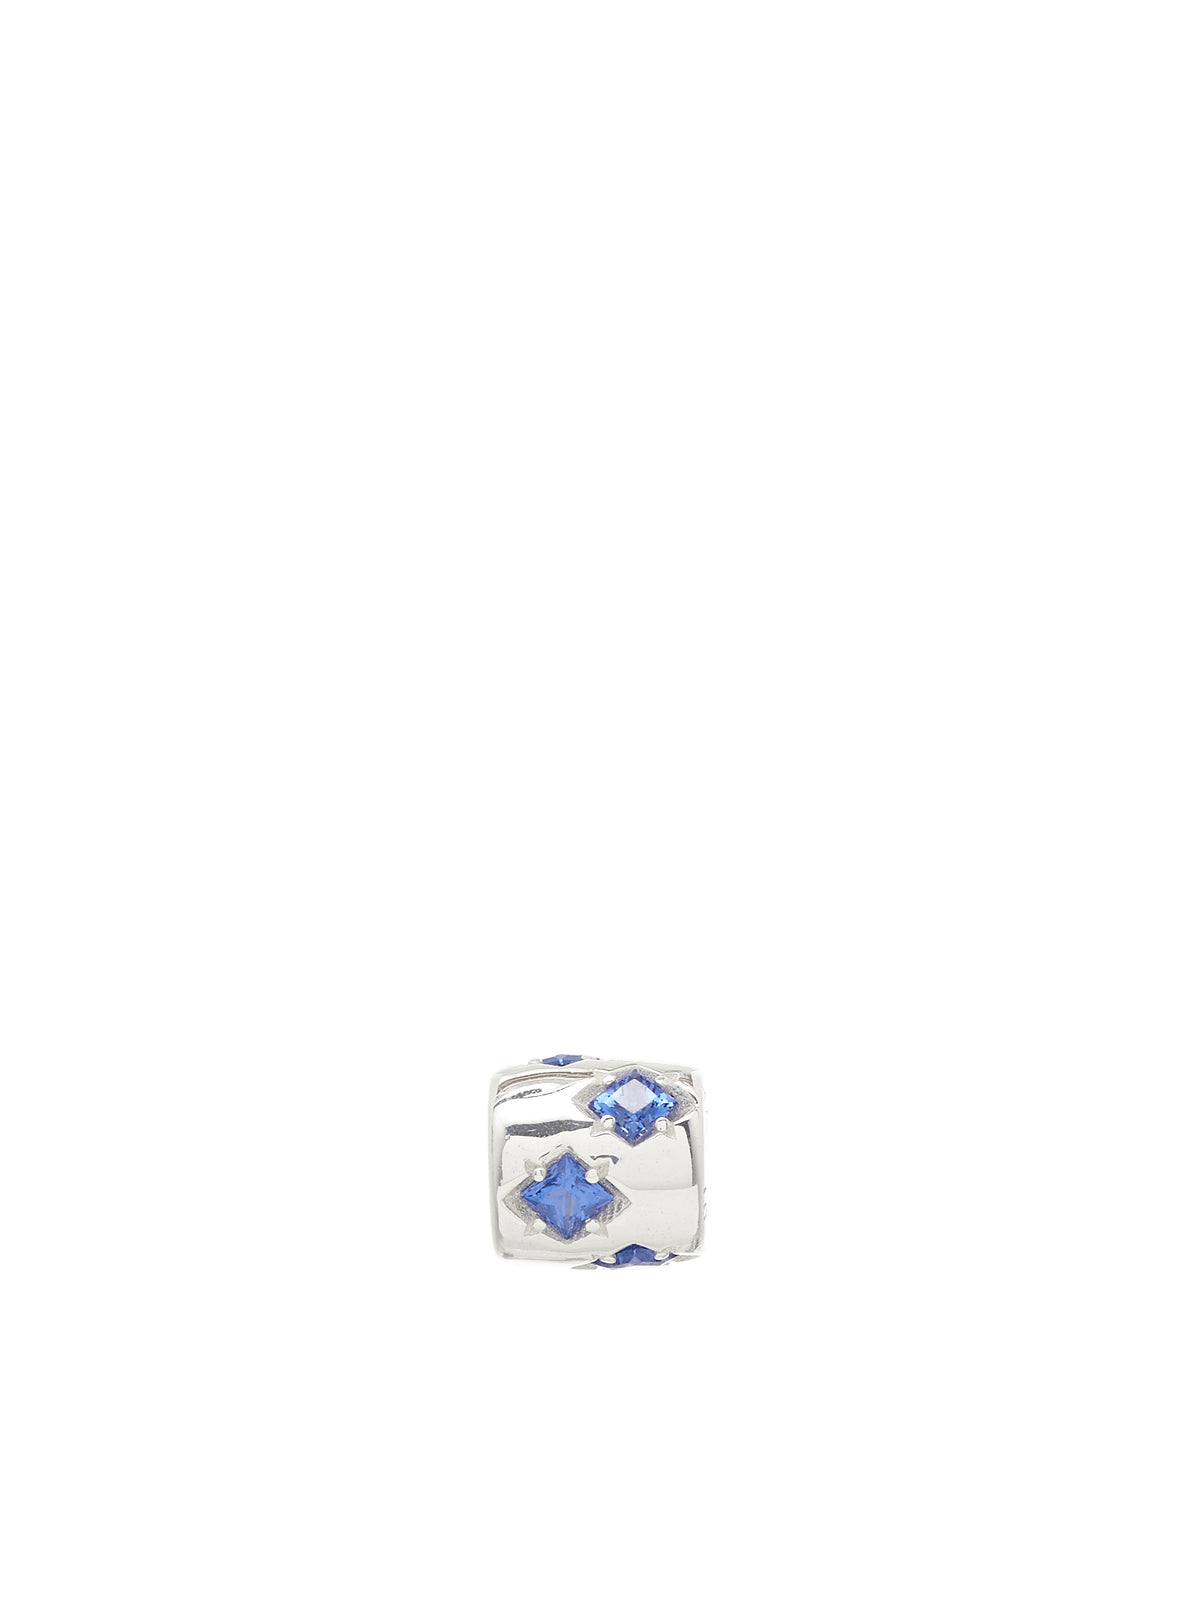 Barilotto Beads (9305-JW02-BLUE-CUBIC)